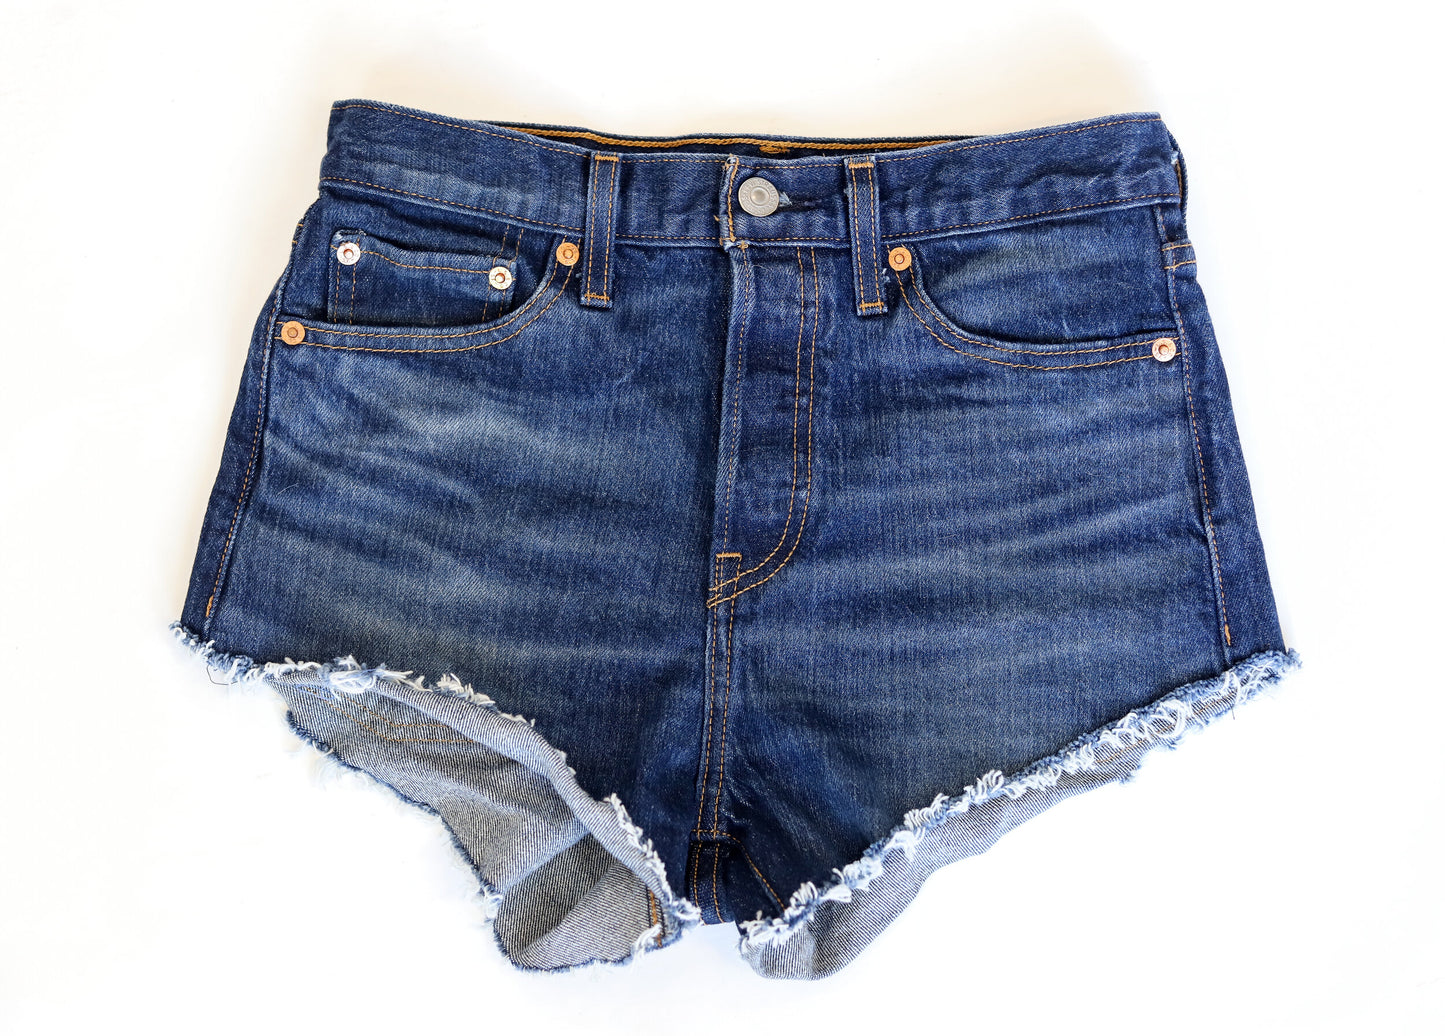 Levi's High Waisted Cut Off Shorts